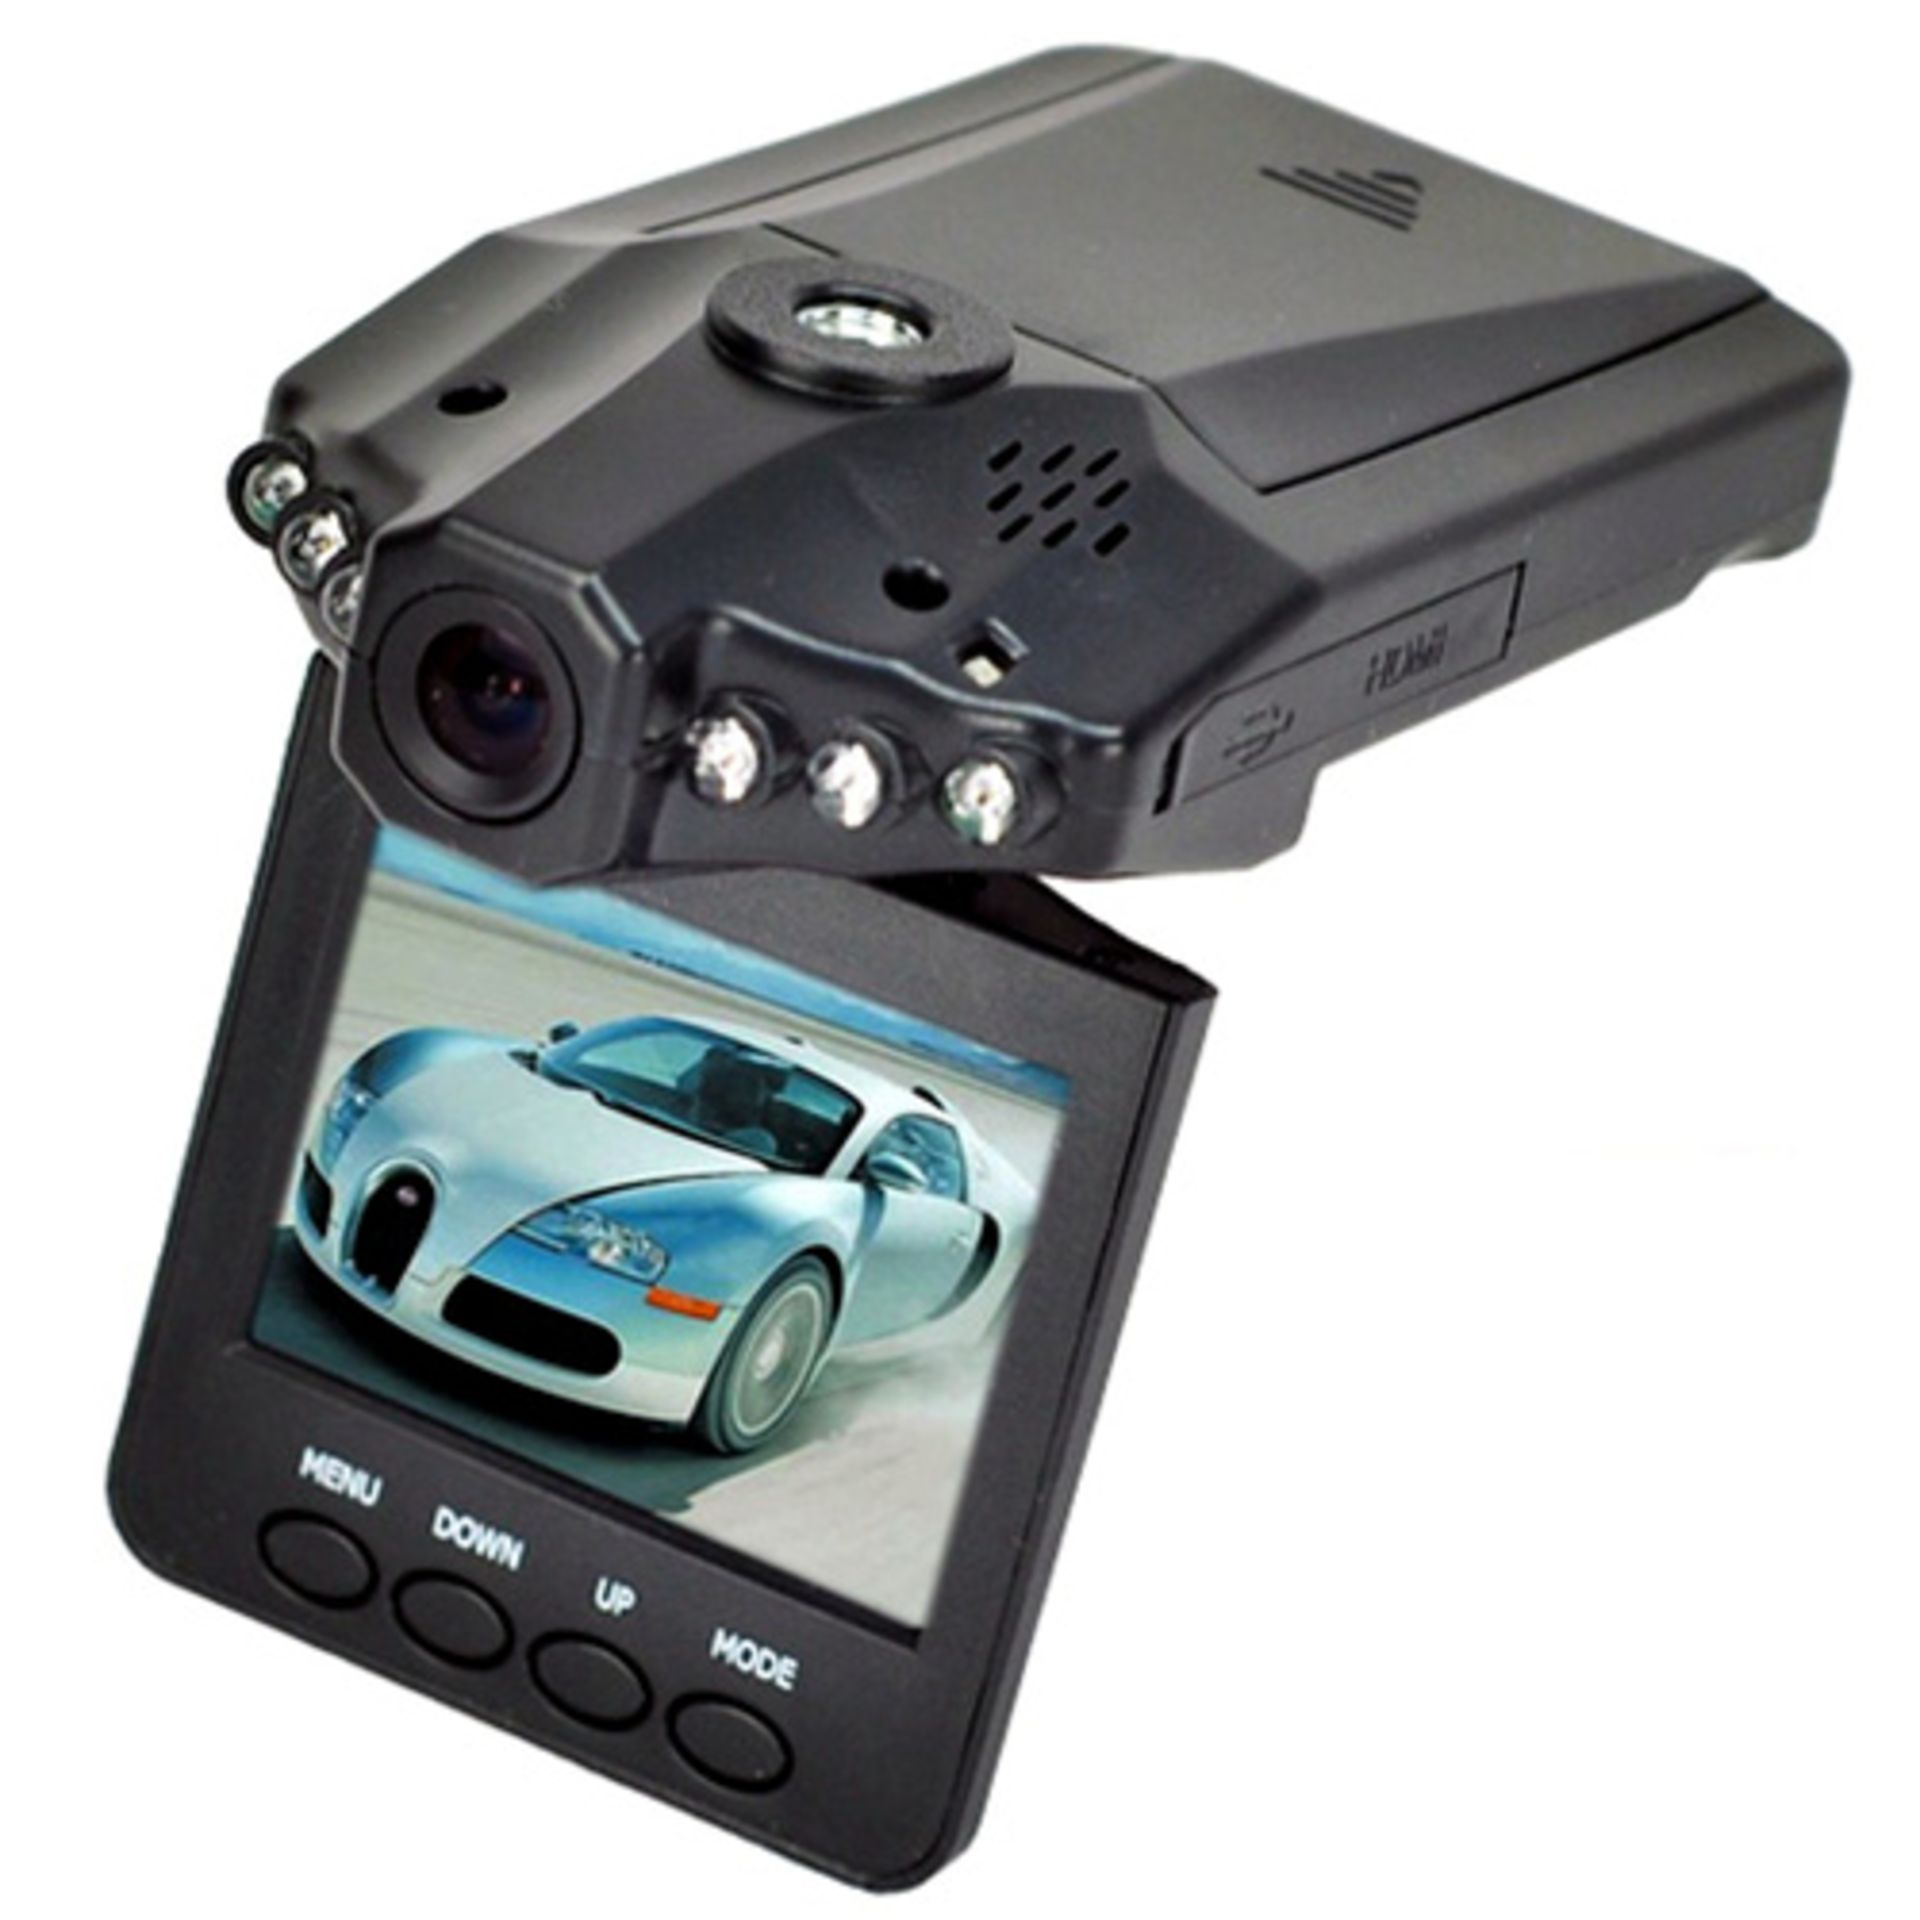 V Brand New HD Portable DVR Dashboard Camera With 2.5" TFT LCD Screen X 50 Bid price to be